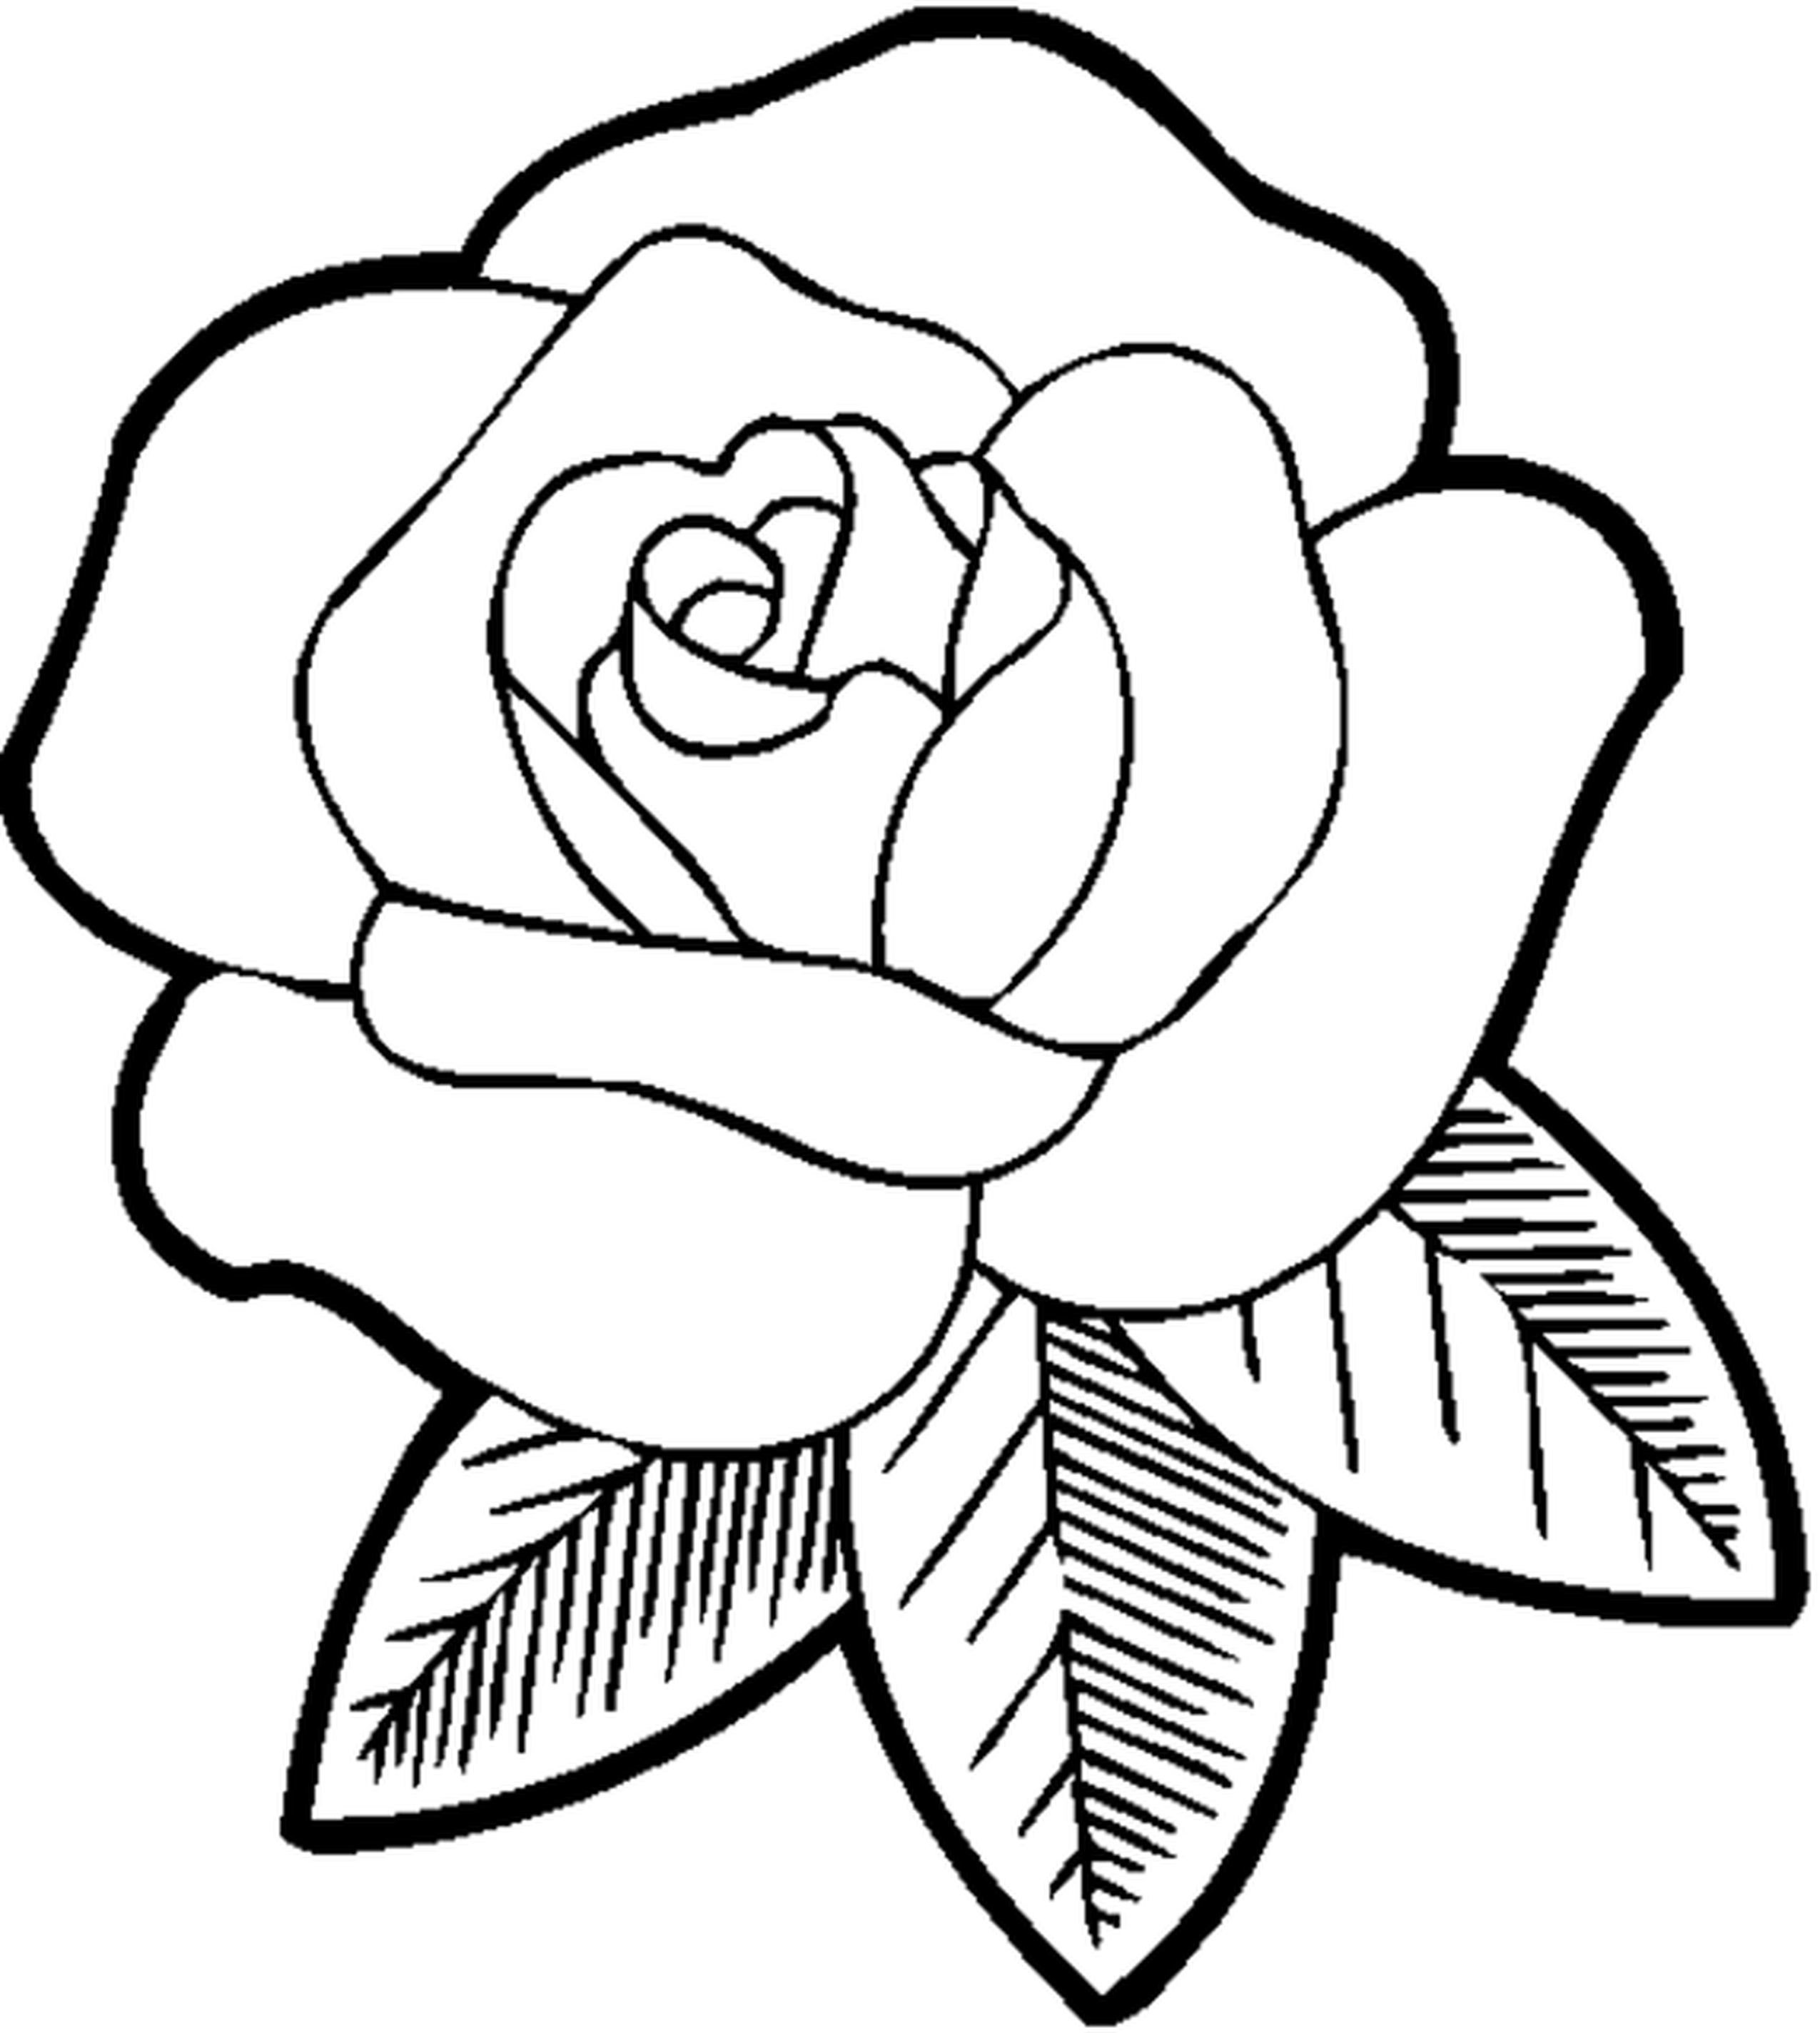 Coloring Pages For Girls Flowers
 Flower Coloring Pages For Teens Coloring Home